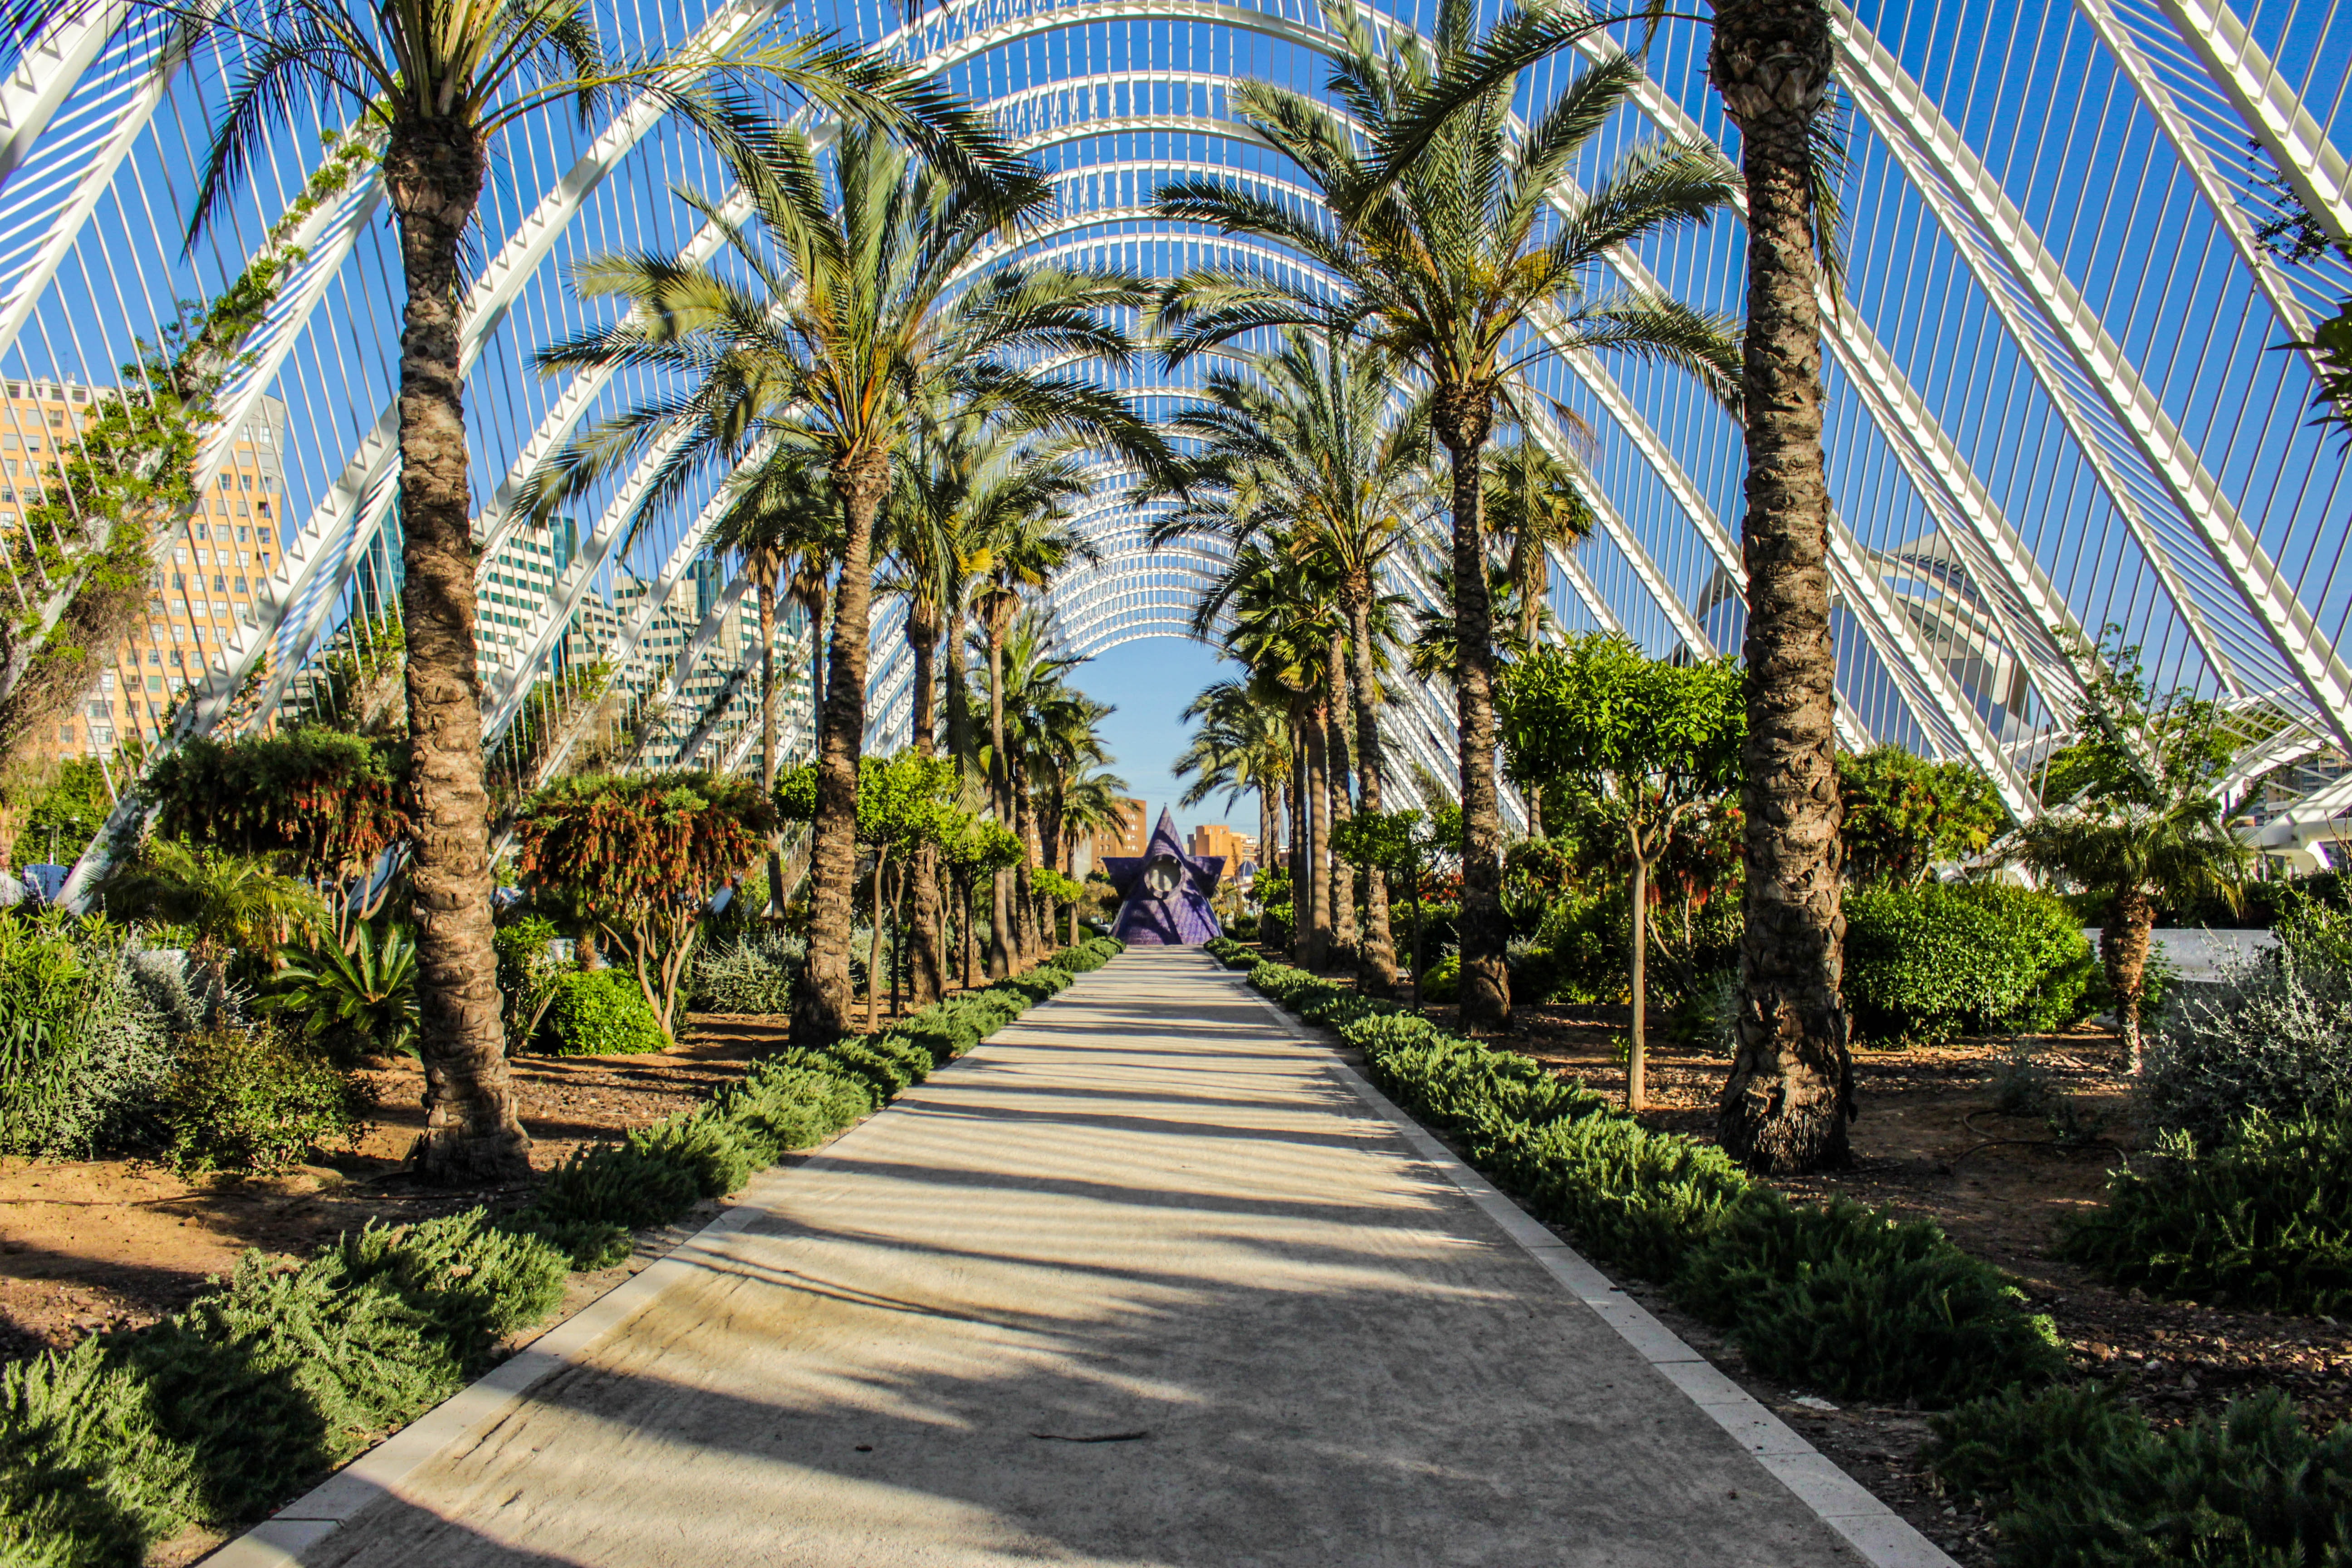 Take in some culture, Things to do for free in Valencia